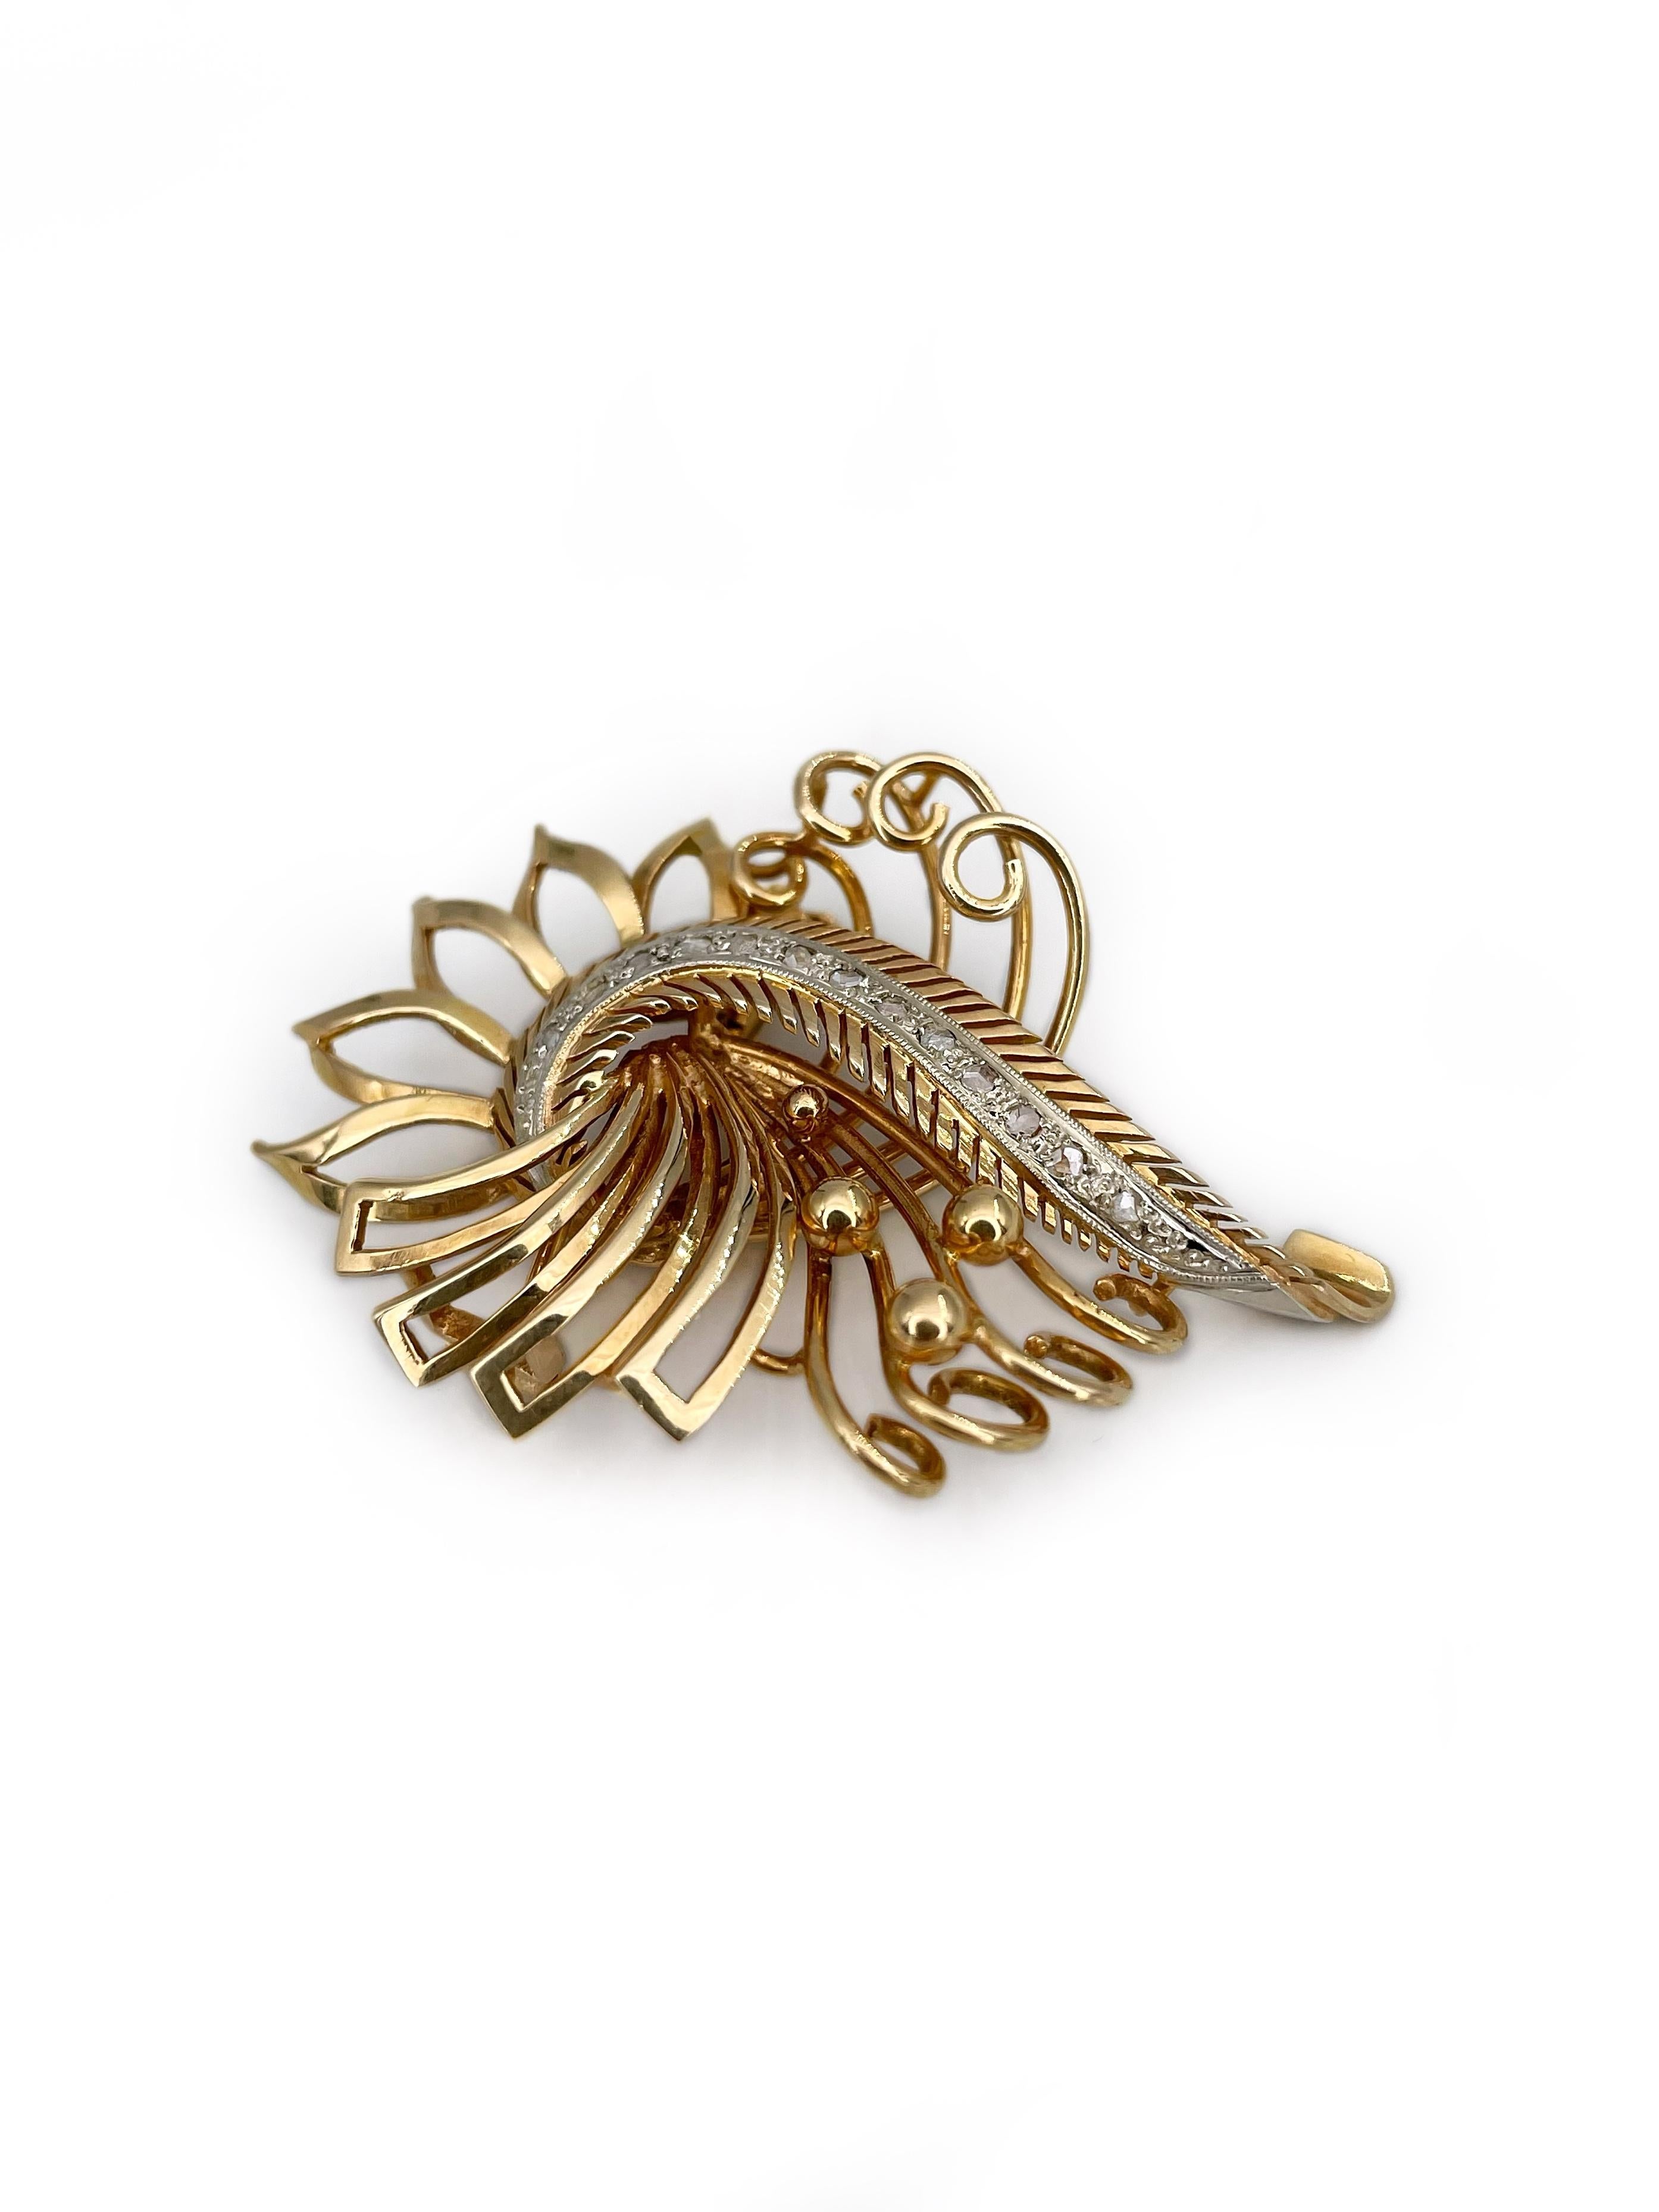 This is a mid century abstract design pin brooch crafted in 18K yellow gold. The piece features rose cut diamonds. Has a safe closure. 

Weight: 12.53g
Size: 5x3.5cm

———

If you have any questions, please feel free to ask. We describe our items